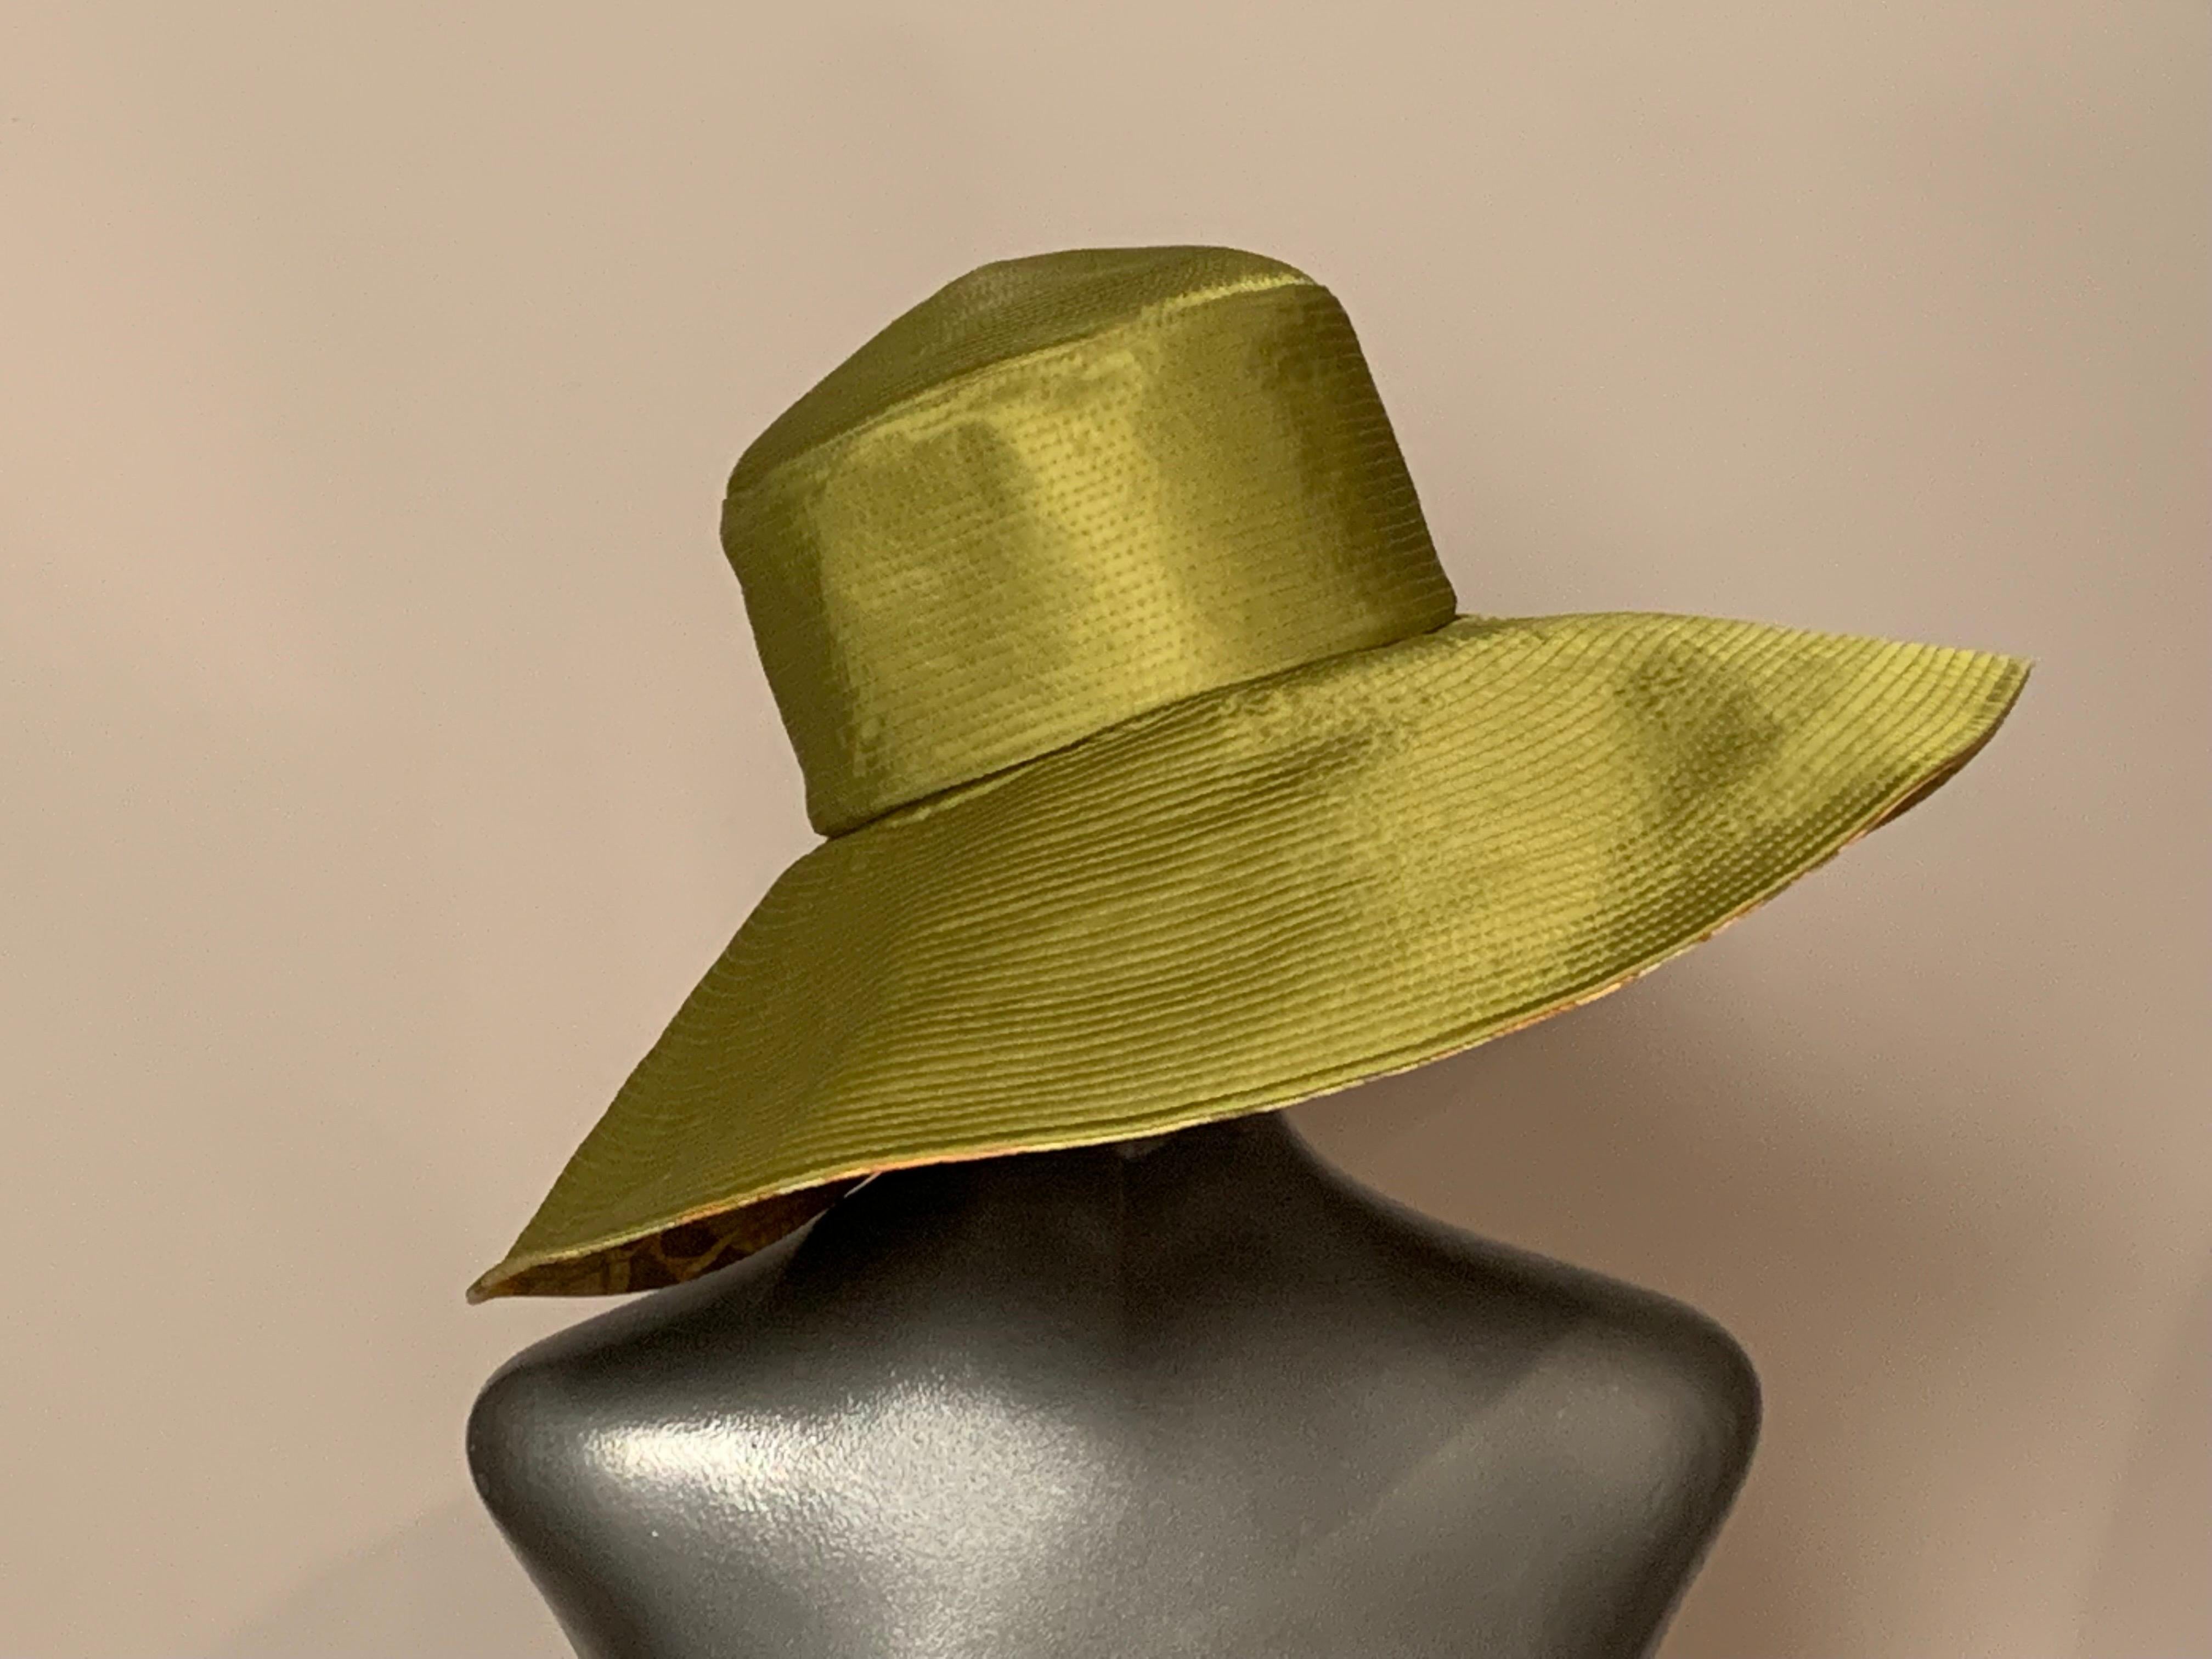 Custom designed and made by Suzanne Couture Millinery on Madison Avenue, NYC this charming hat is made from channel quilted green silk with a cheerful sunflower print brim and lining.  It folds, so it is a perfect travel hat!
Measurements;   Height